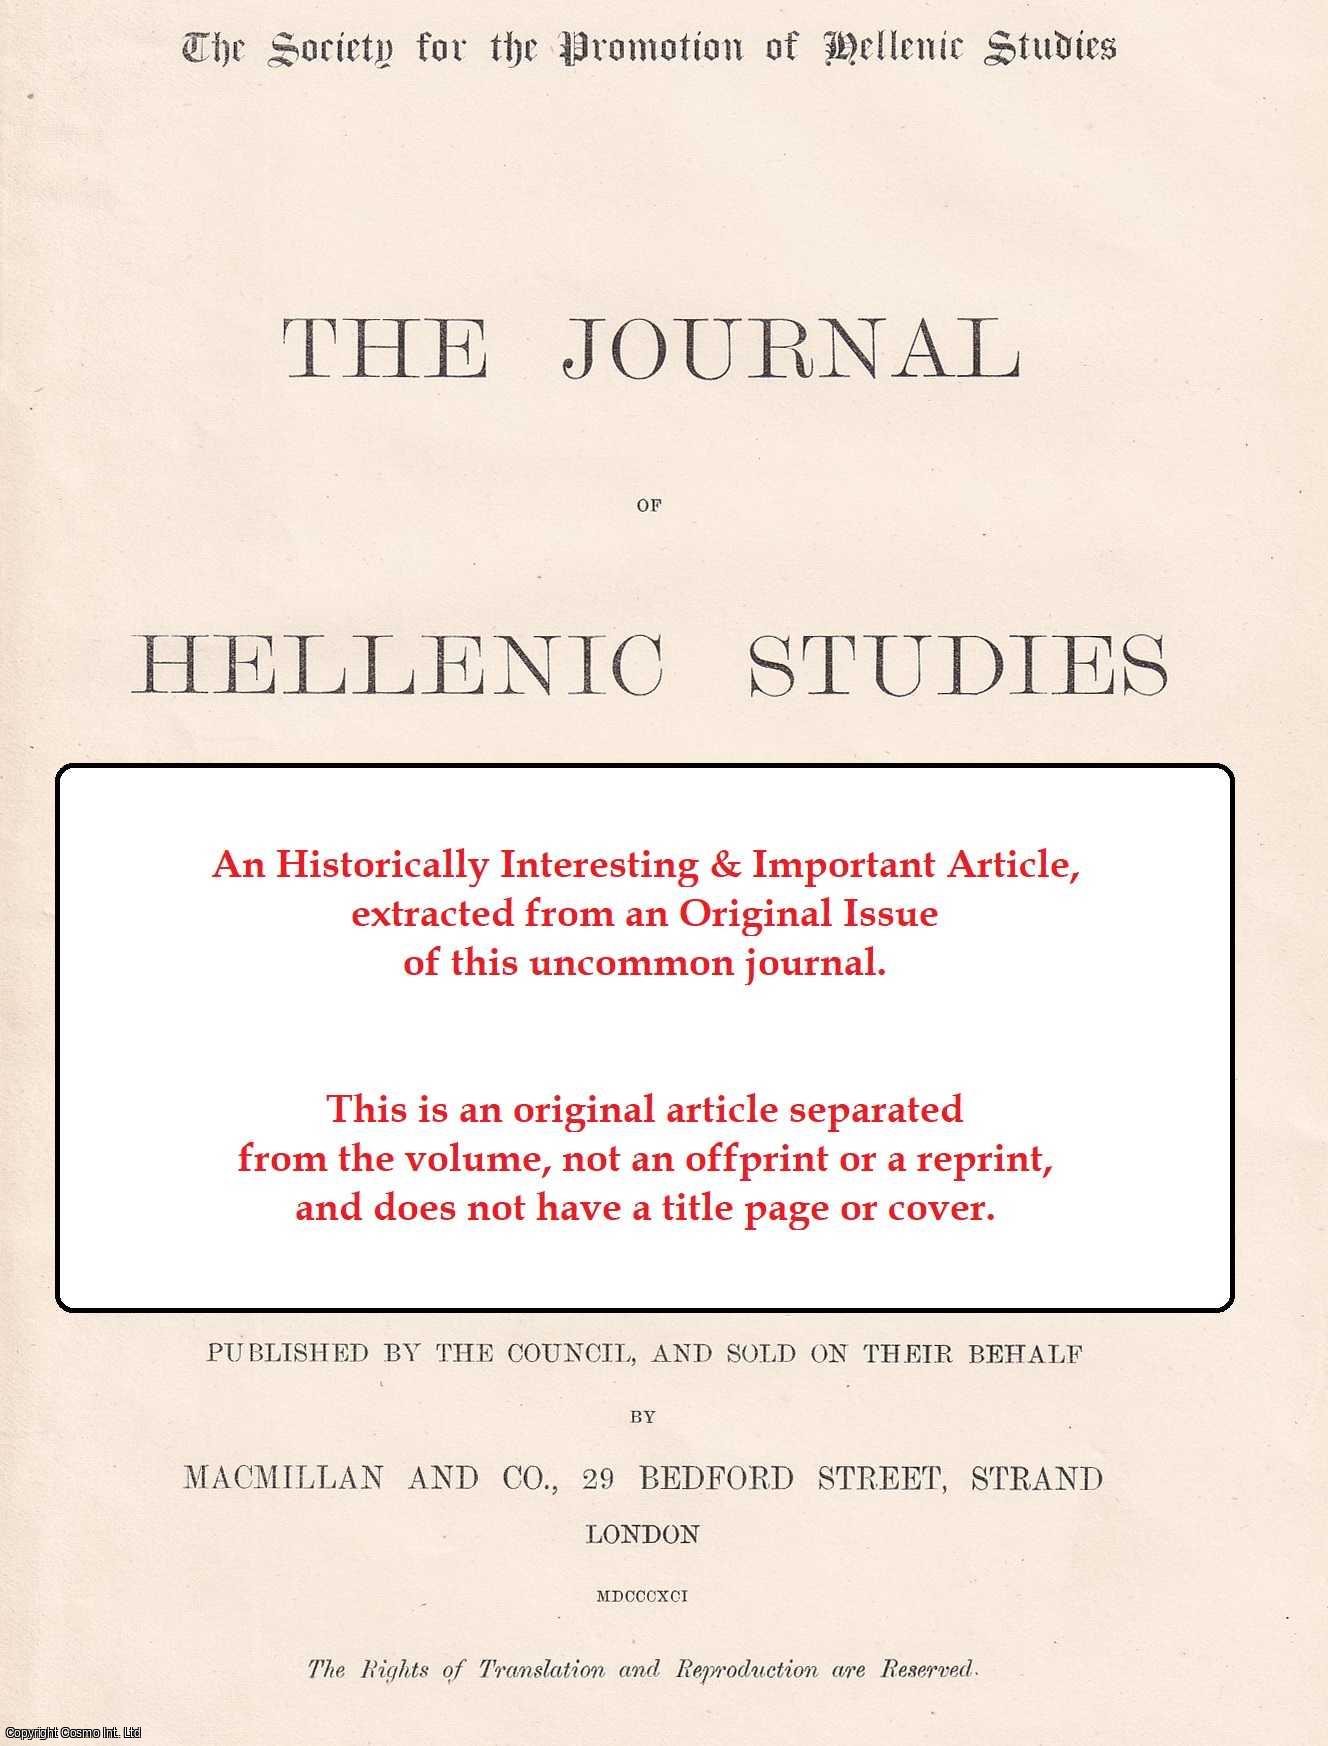 A.W. Verrall - The Hymn to Apollo: An Essay in the Homeric Question. An uncommon original article from the journal of Hellenic studies, 1894.